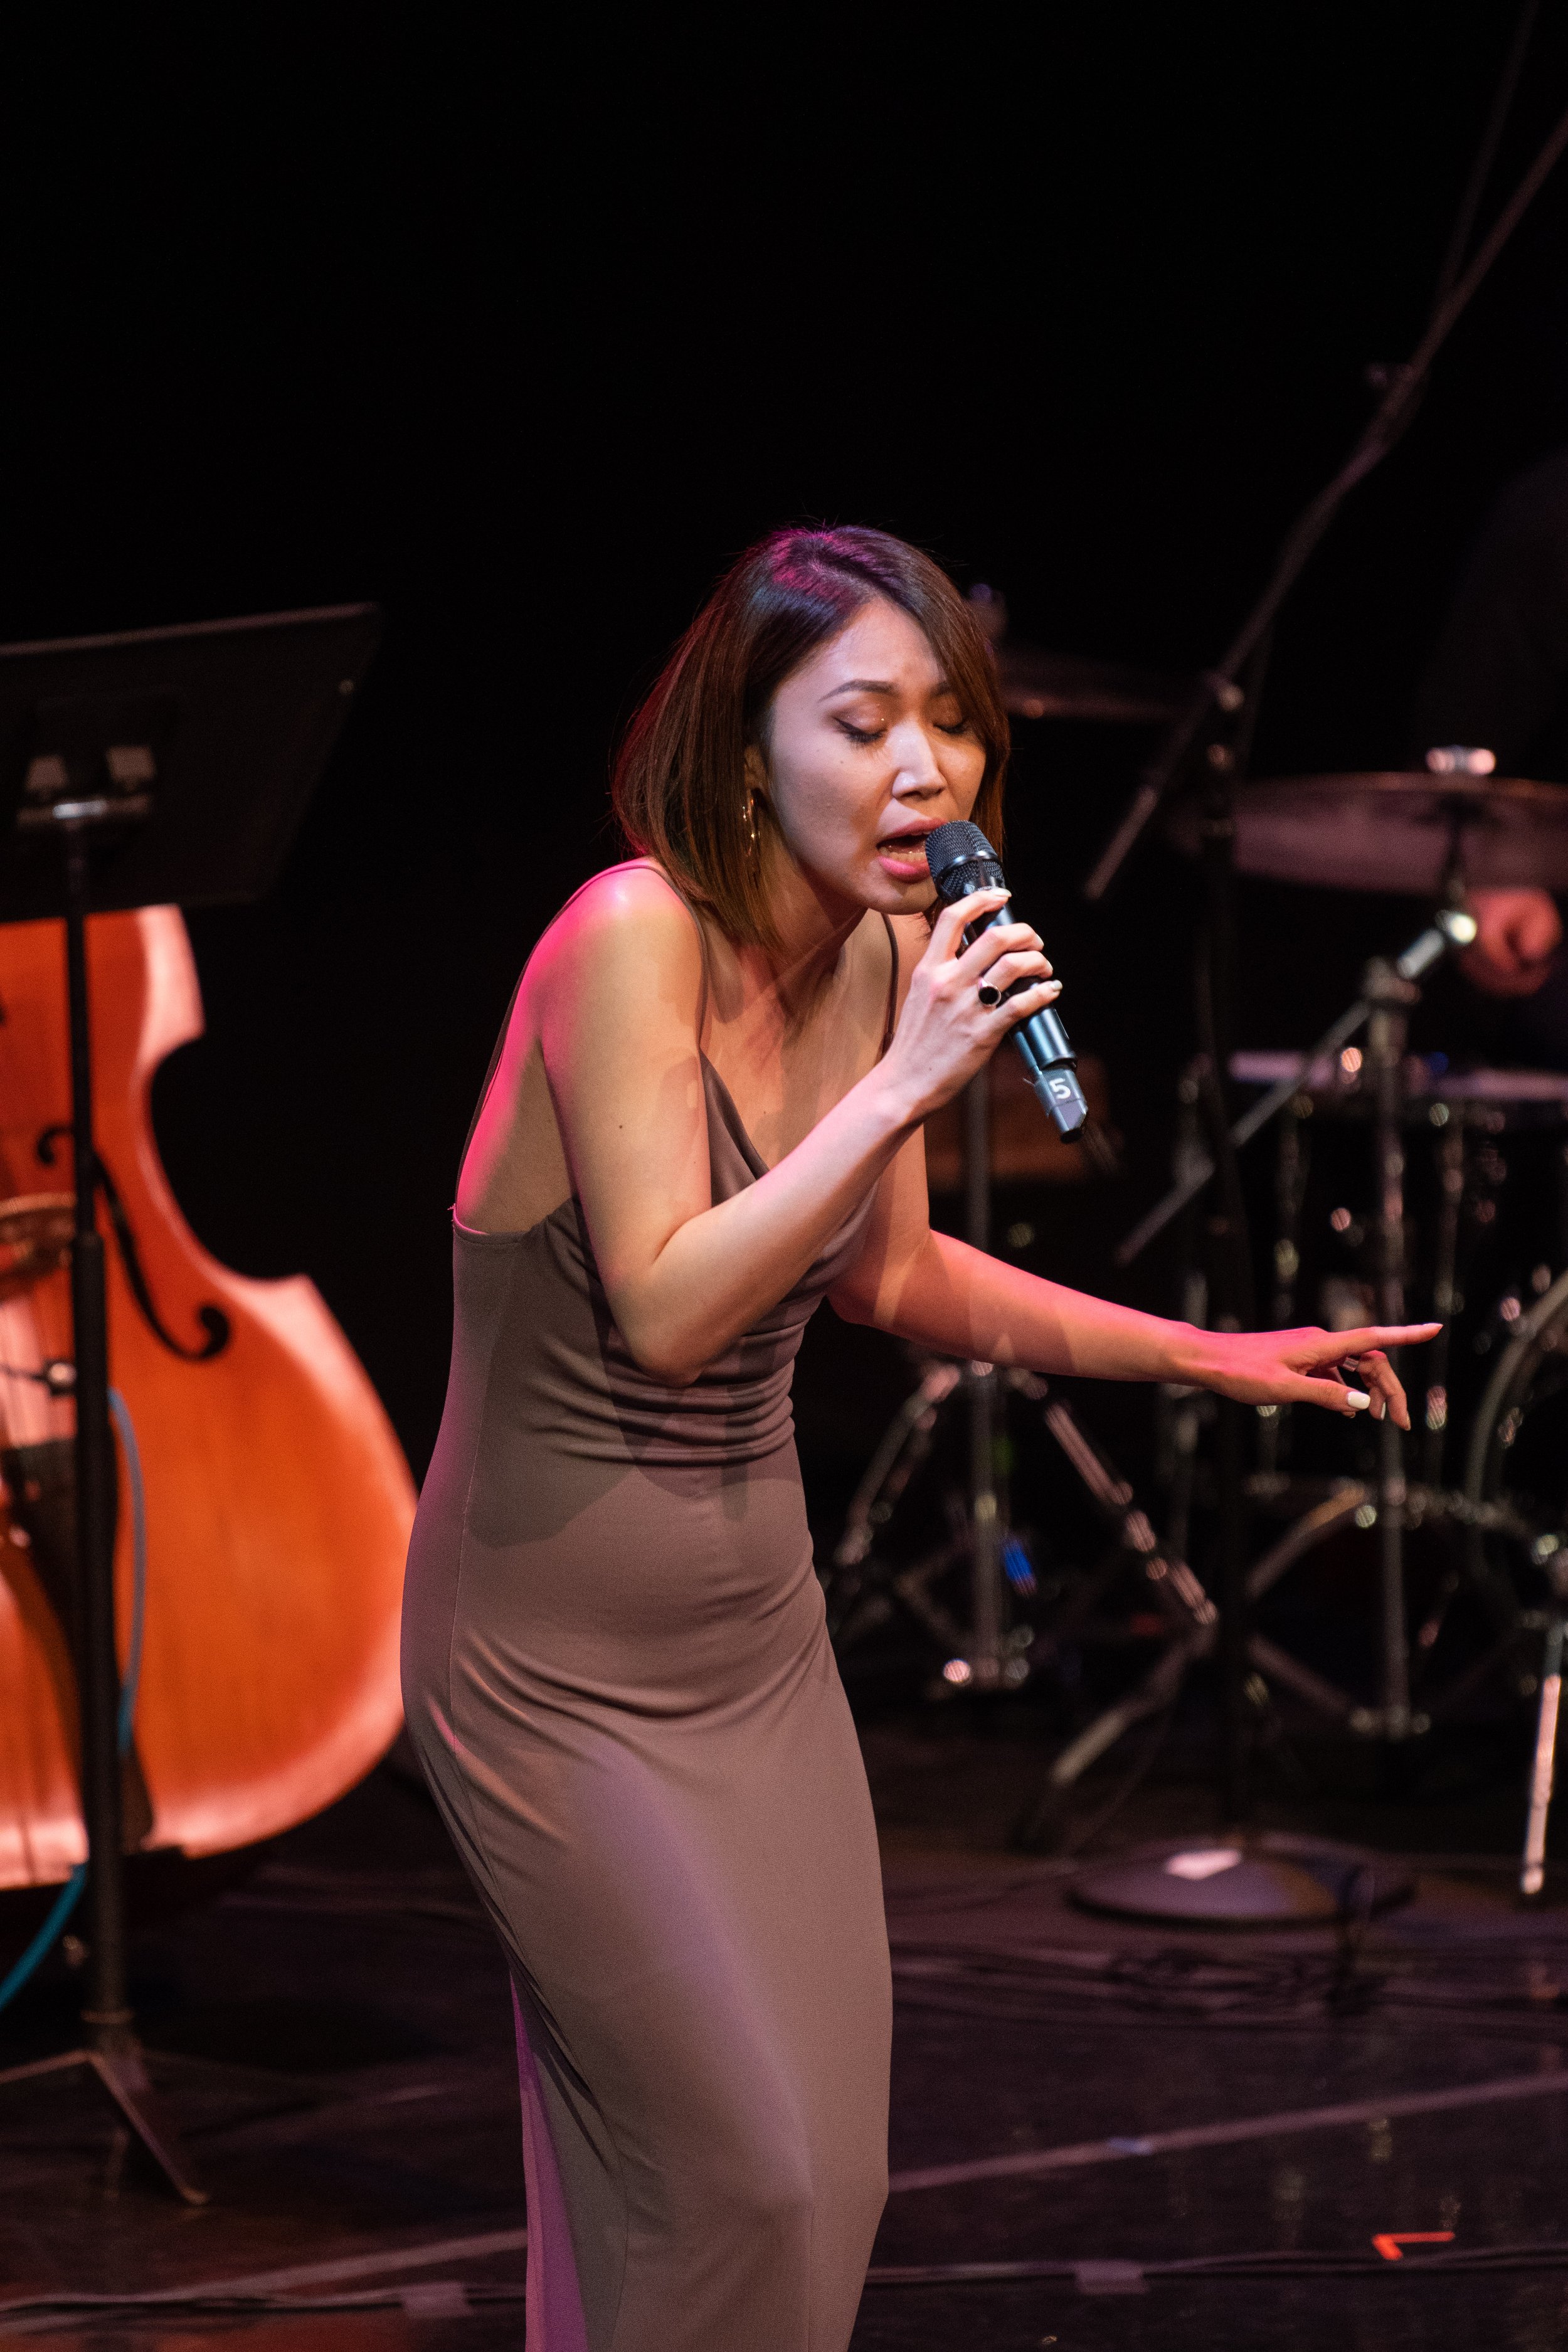  Jodie (Yueun) Lee sings alongside an ensemble during the Applied Music Showcase on Friday, May 6, 2022 in Santa Monica, Calif. The Applied Music Showcase is a semester tradition in which students show their hard work and scholarships are announced f